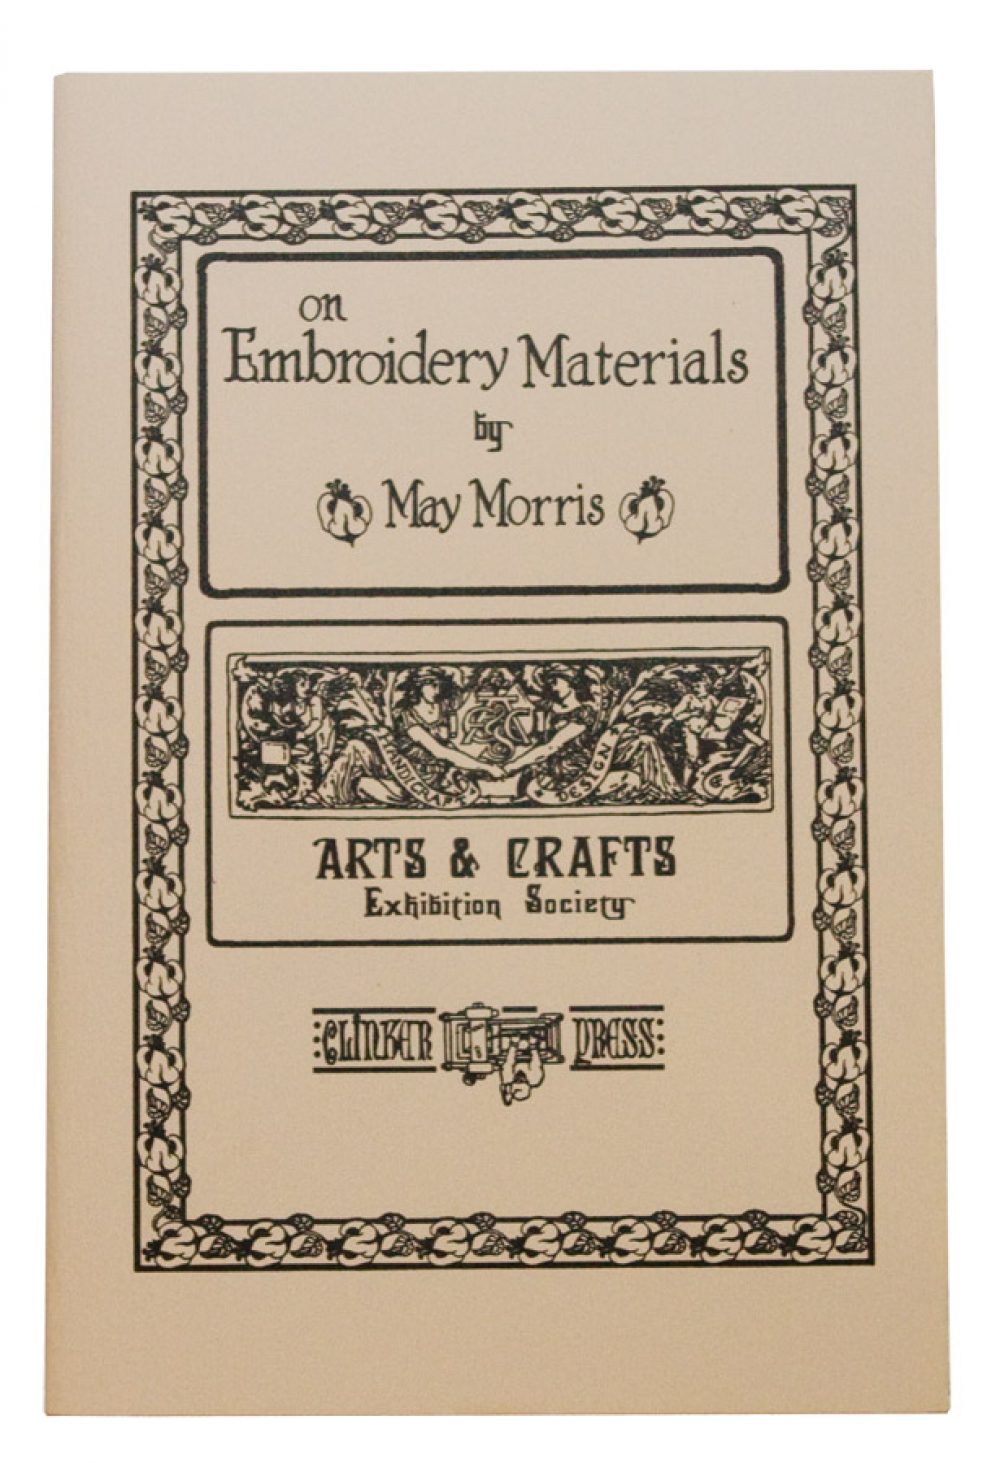 On Embroidery Materials (Softcover) by May Morris